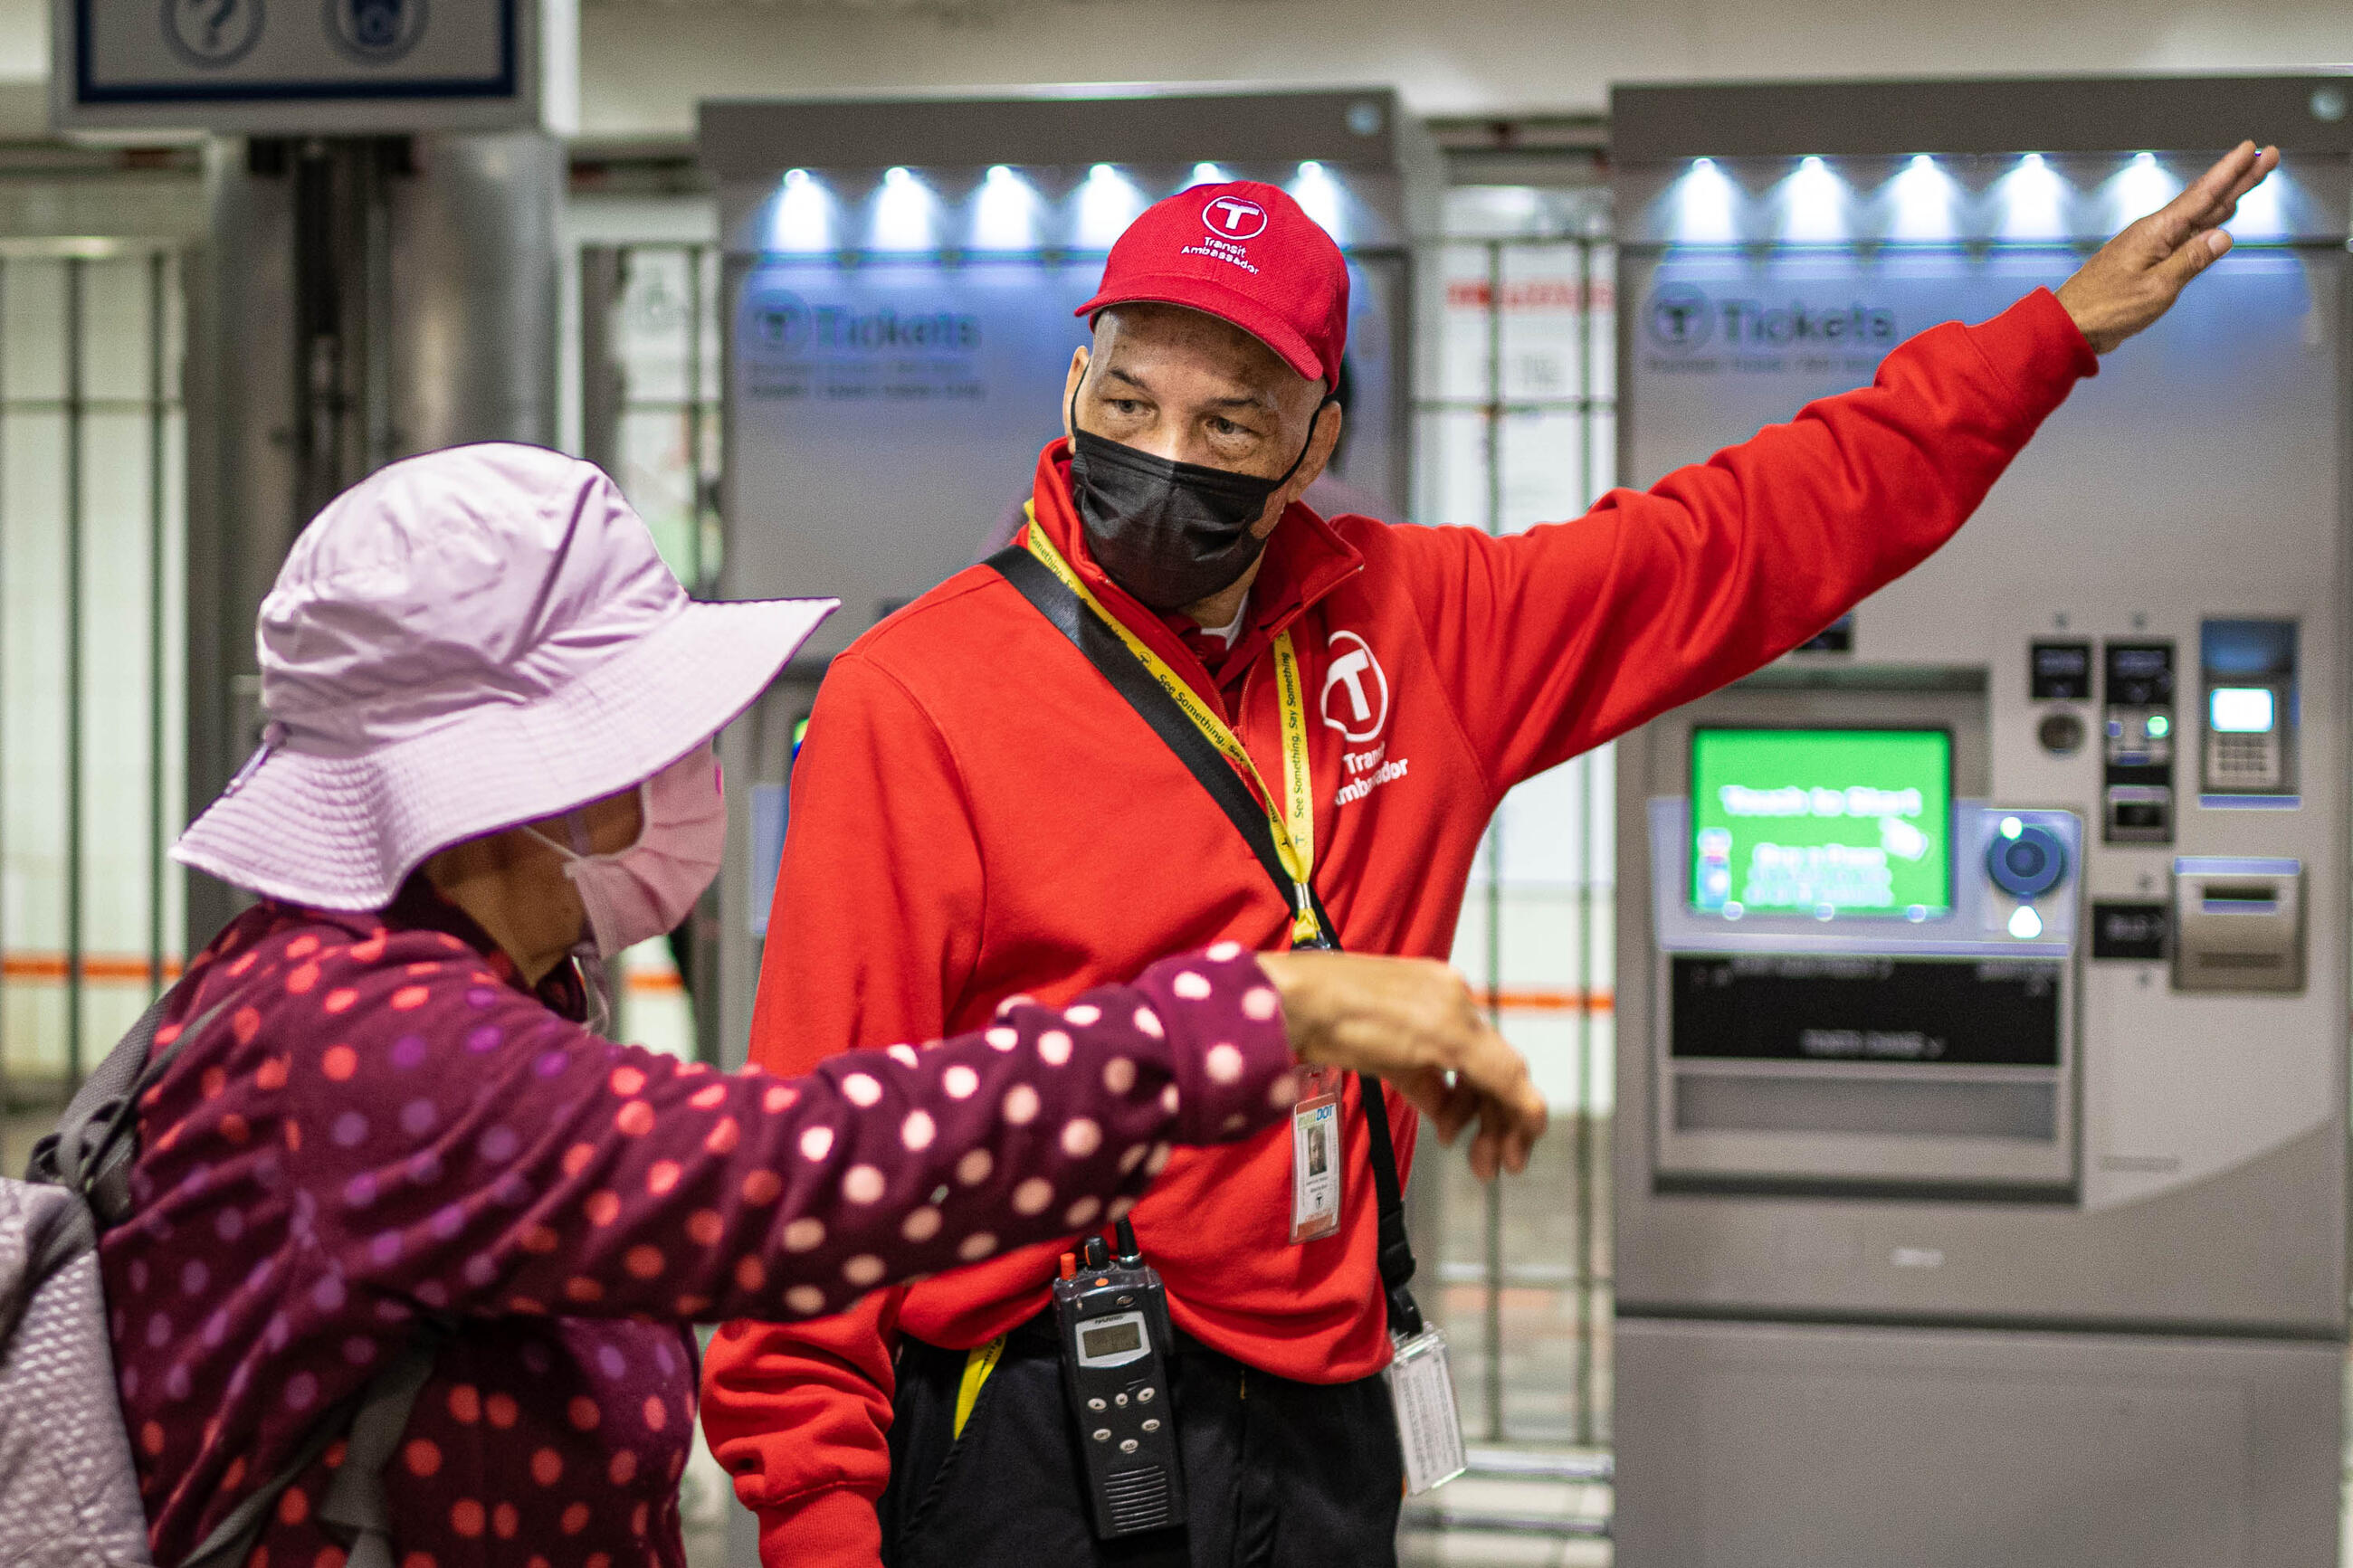 A transit ambassador stands inside a station in front of fare purchase machines and provides an elder with directions. The two people face each other and both point to the right.  